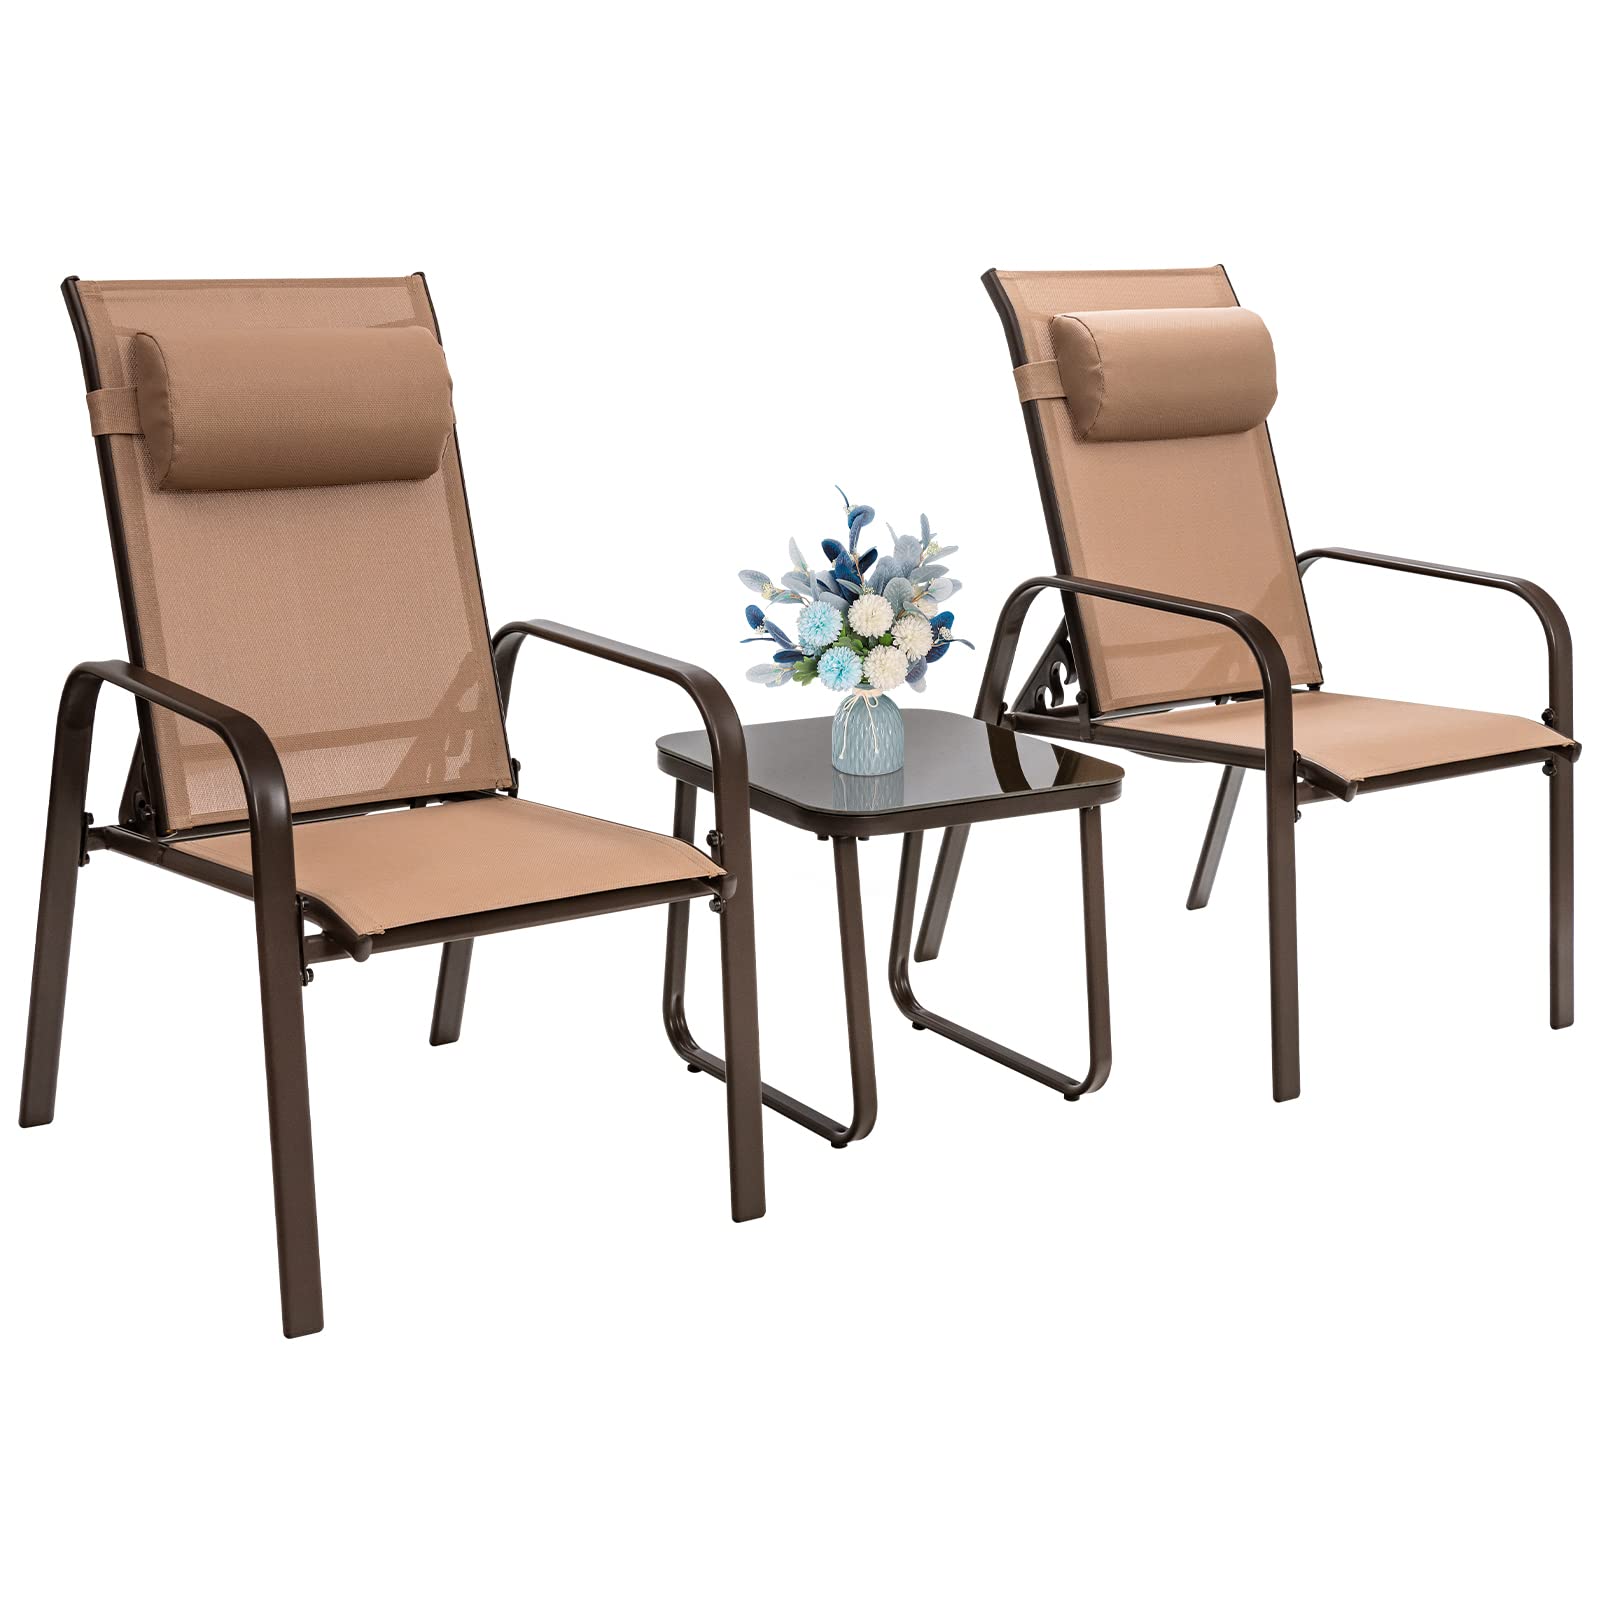 Giantex Stackable Patio Chairs with Adjustable Backrest Headrest, 3 Pieces